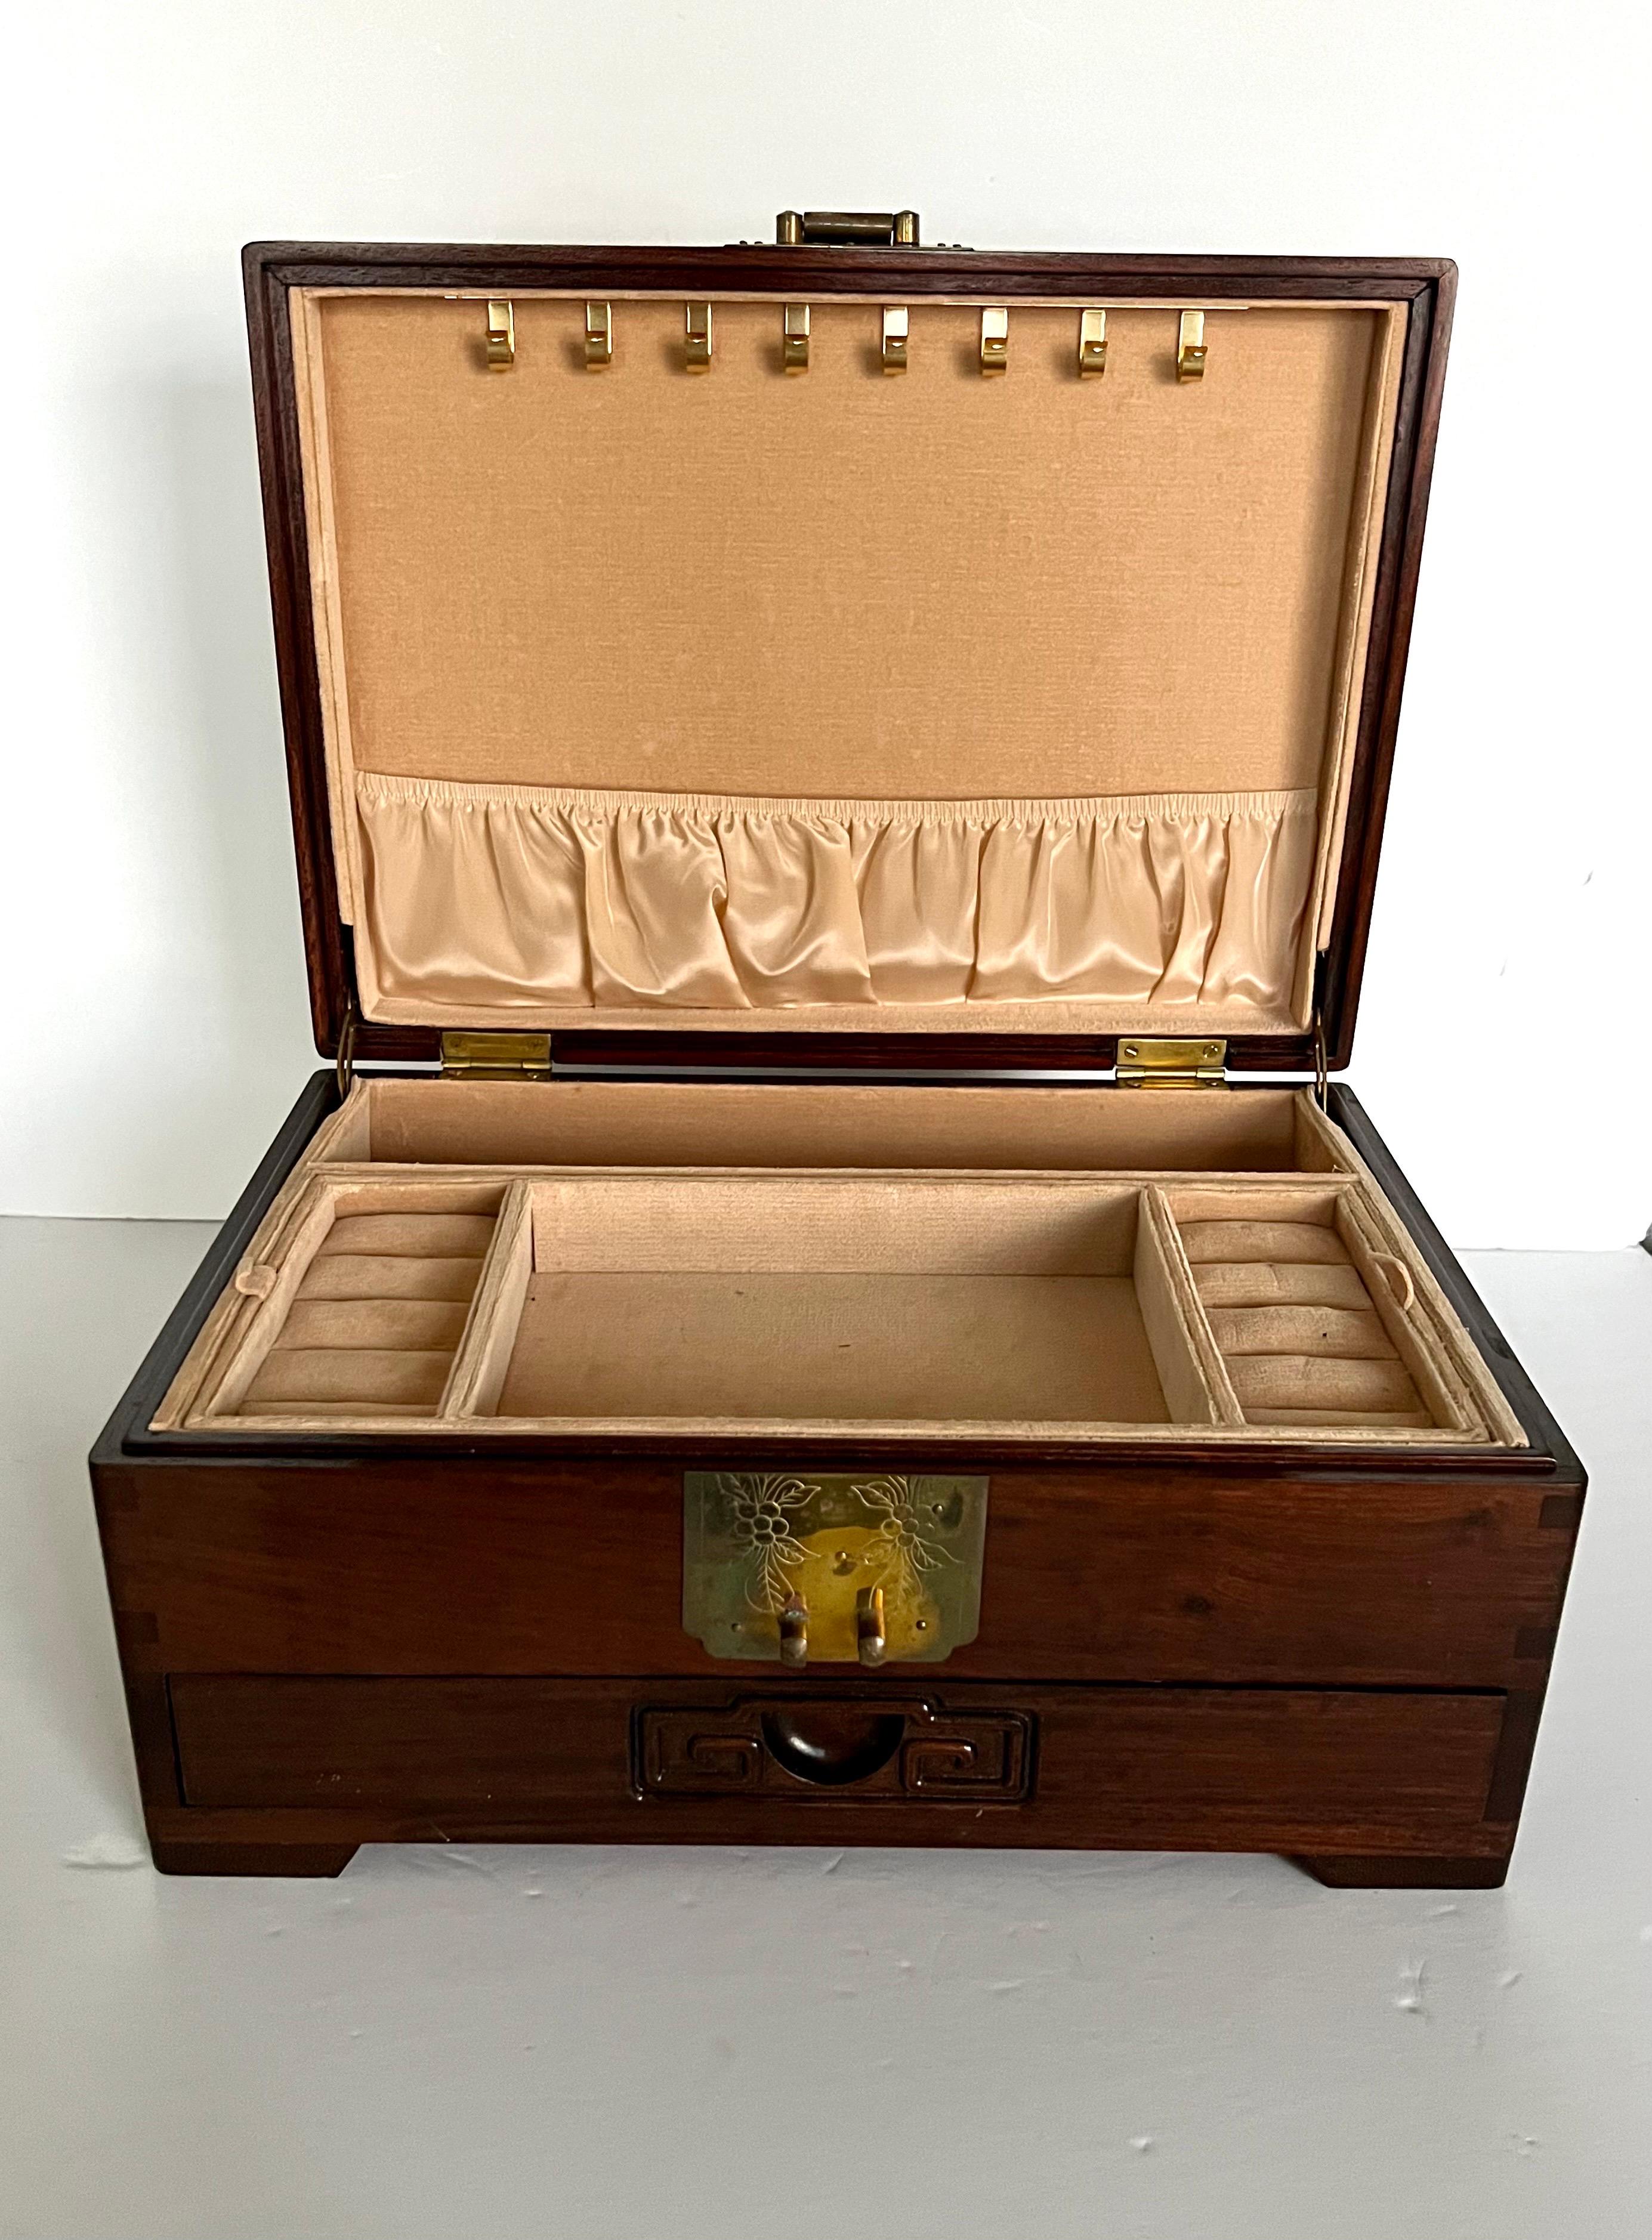 Here is nice large Chinese rosewood jewelry box with ornate solid brass fitting with a round longevity symbol carved in the middle and light peach felt lining inside. Comes with lock and key 
Has a silk interior in a beautiful peach color with a